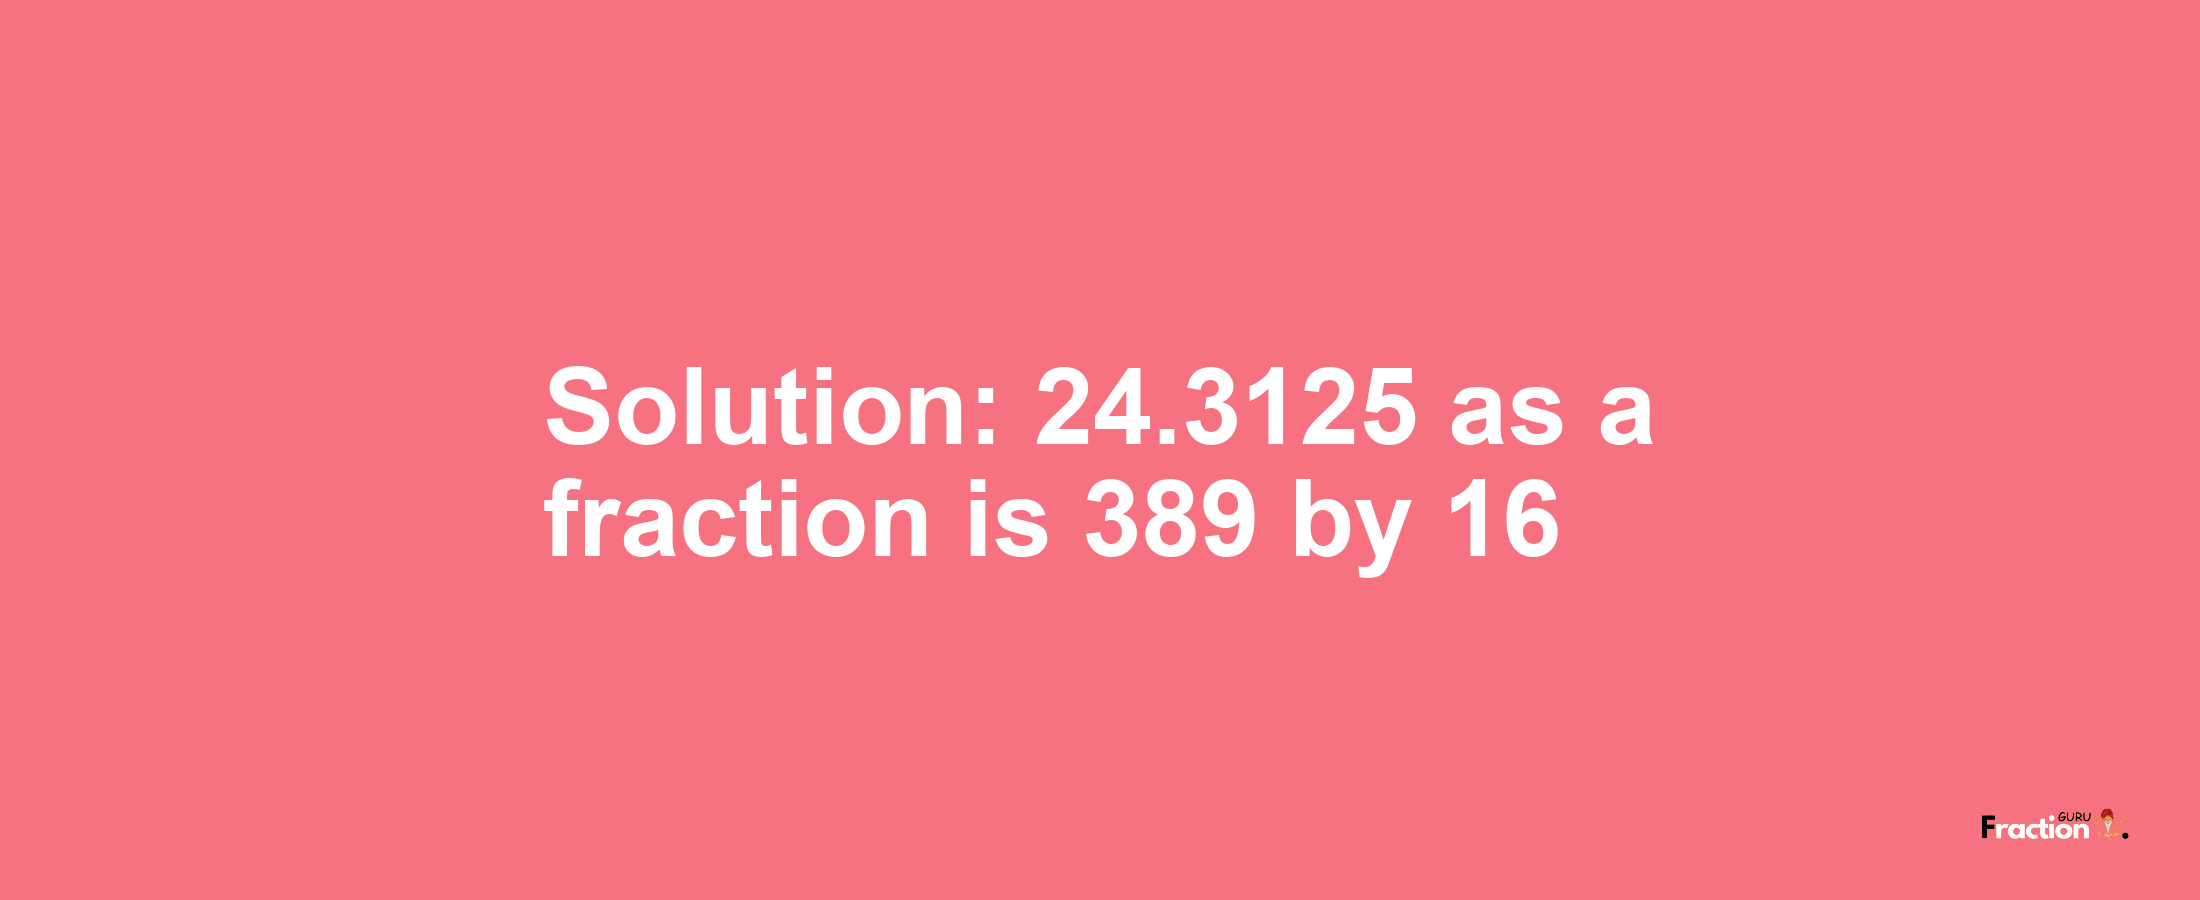 Solution:24.3125 as a fraction is 389/16